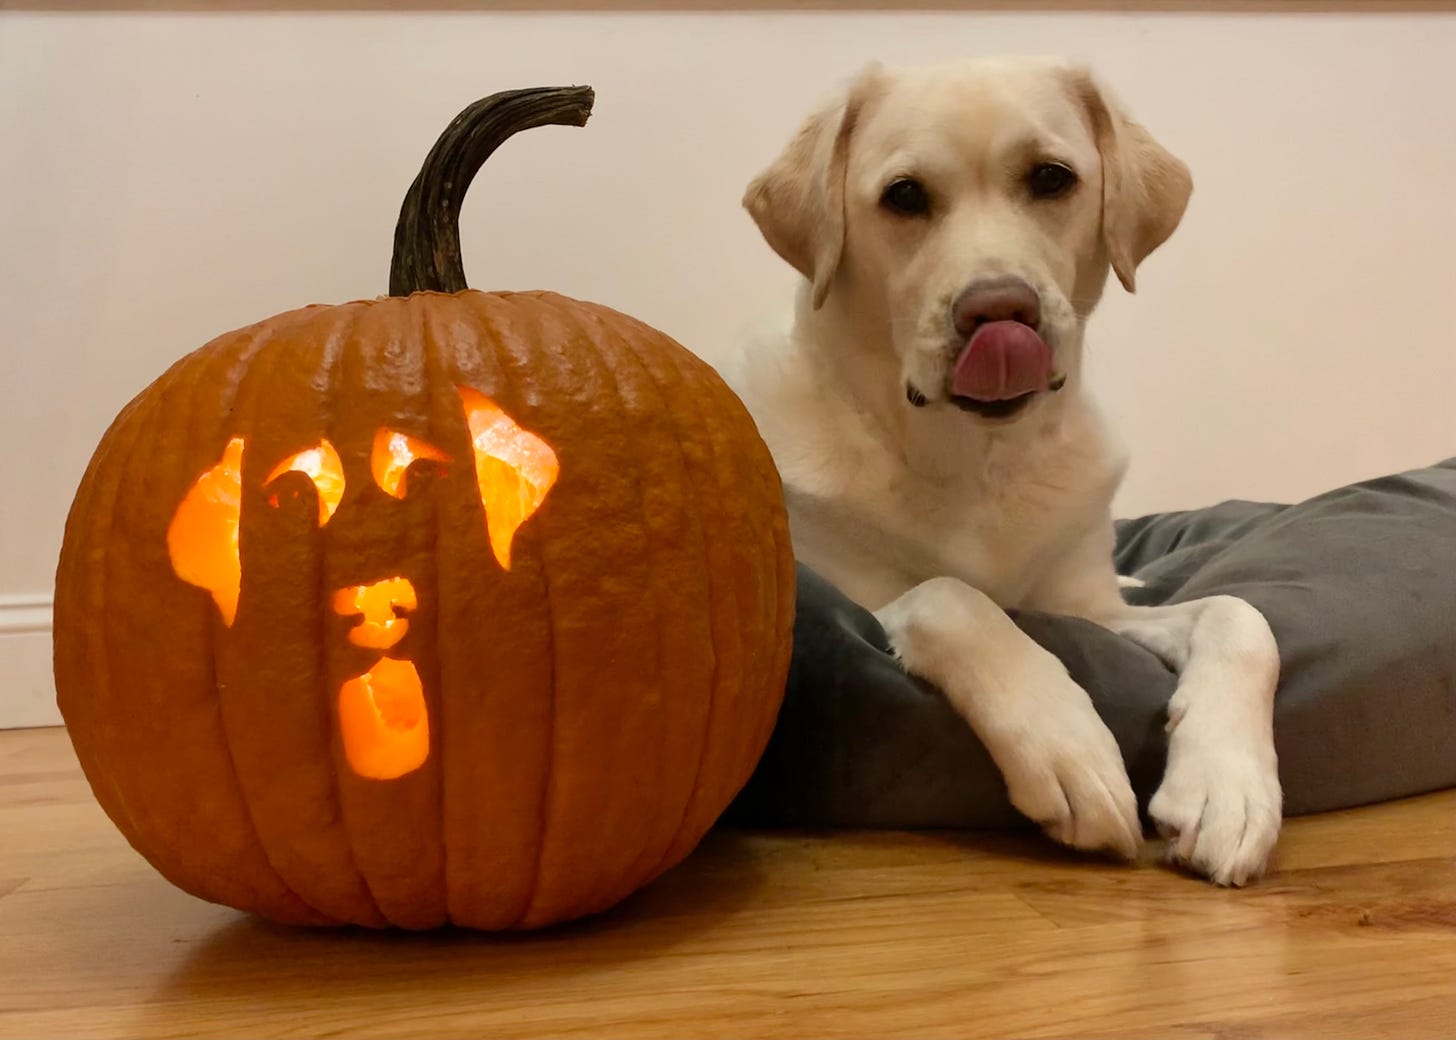 A yellow Labrador retriever with her tongue out lays on a gray dog bed on a hardwood floor. She's next to a pumpkin carved to look like a dog face. 